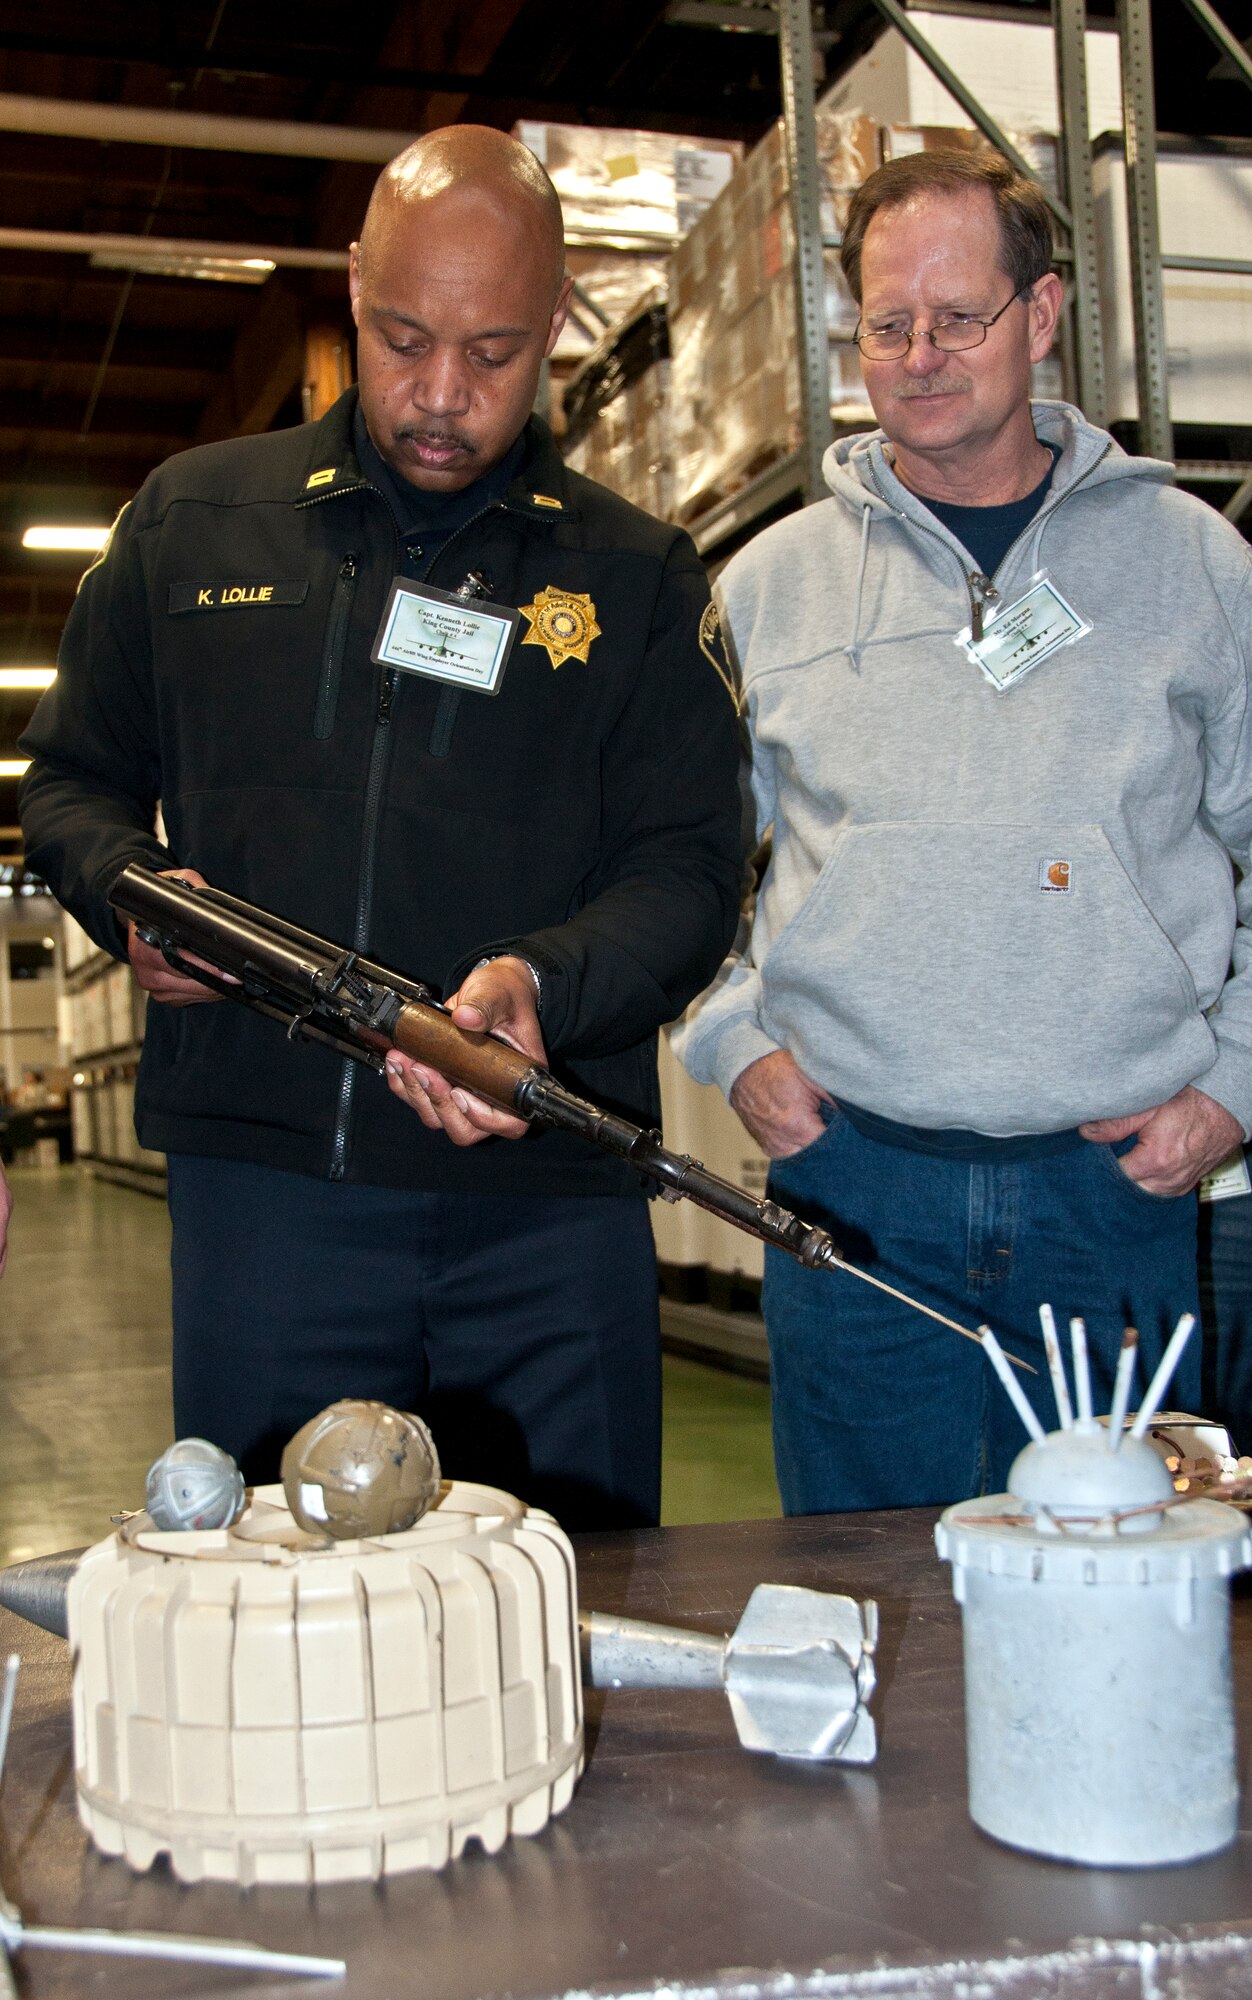 Capt. Ken Lollie (left), King County Jail, and Ed Morgan, Simpson Lumber, examine a bayonette at the 446th Airlift Wing's Employer Orientation Day held March 31 here.  More than 30 civilian employers of 446th AW's members participated in the event.